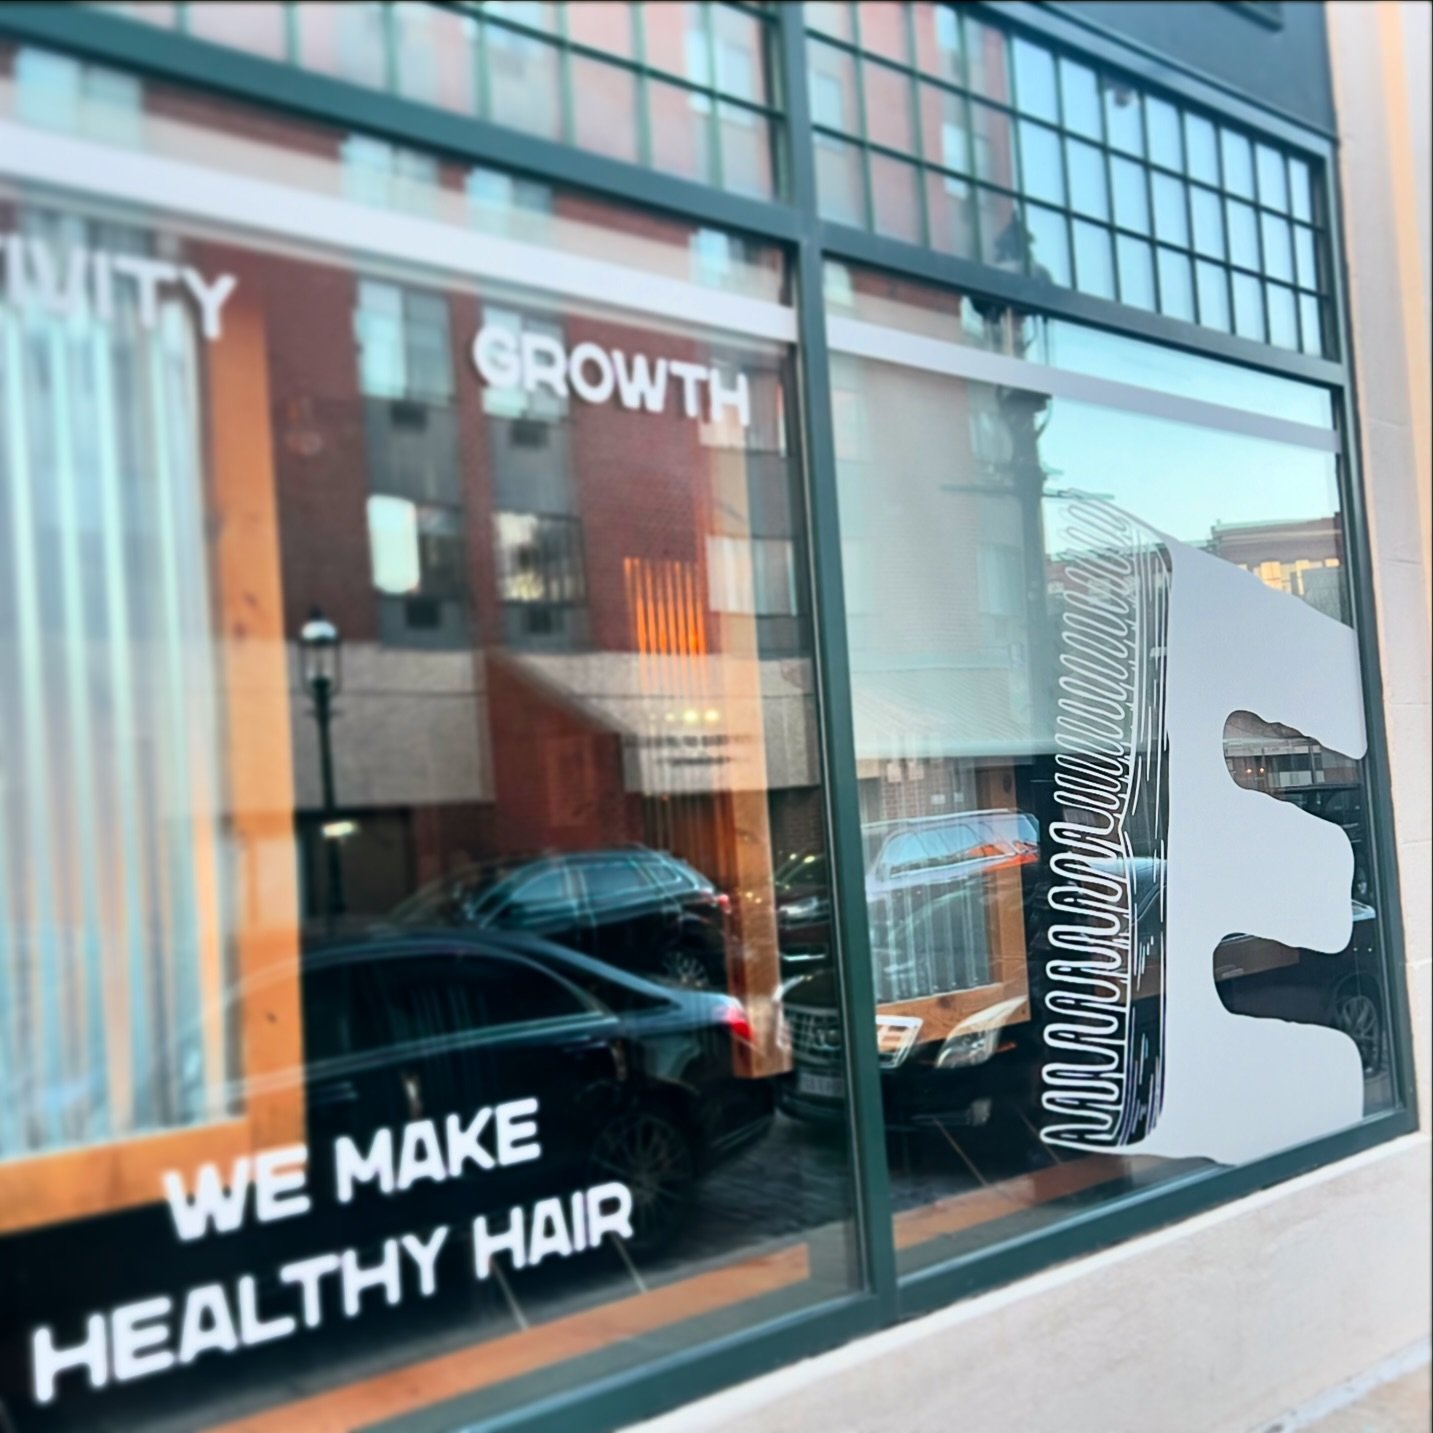 Muster Up in the wild for @eyefulbeautysalon who dressed up their windows with their new branding. Congrats on the new signage fam! That&rsquo;s hot. 😎🤘💜🔥 

#branding #smallbusinessowner #smallbusinesssupport #femaleentrepreneur #smallandmightybu